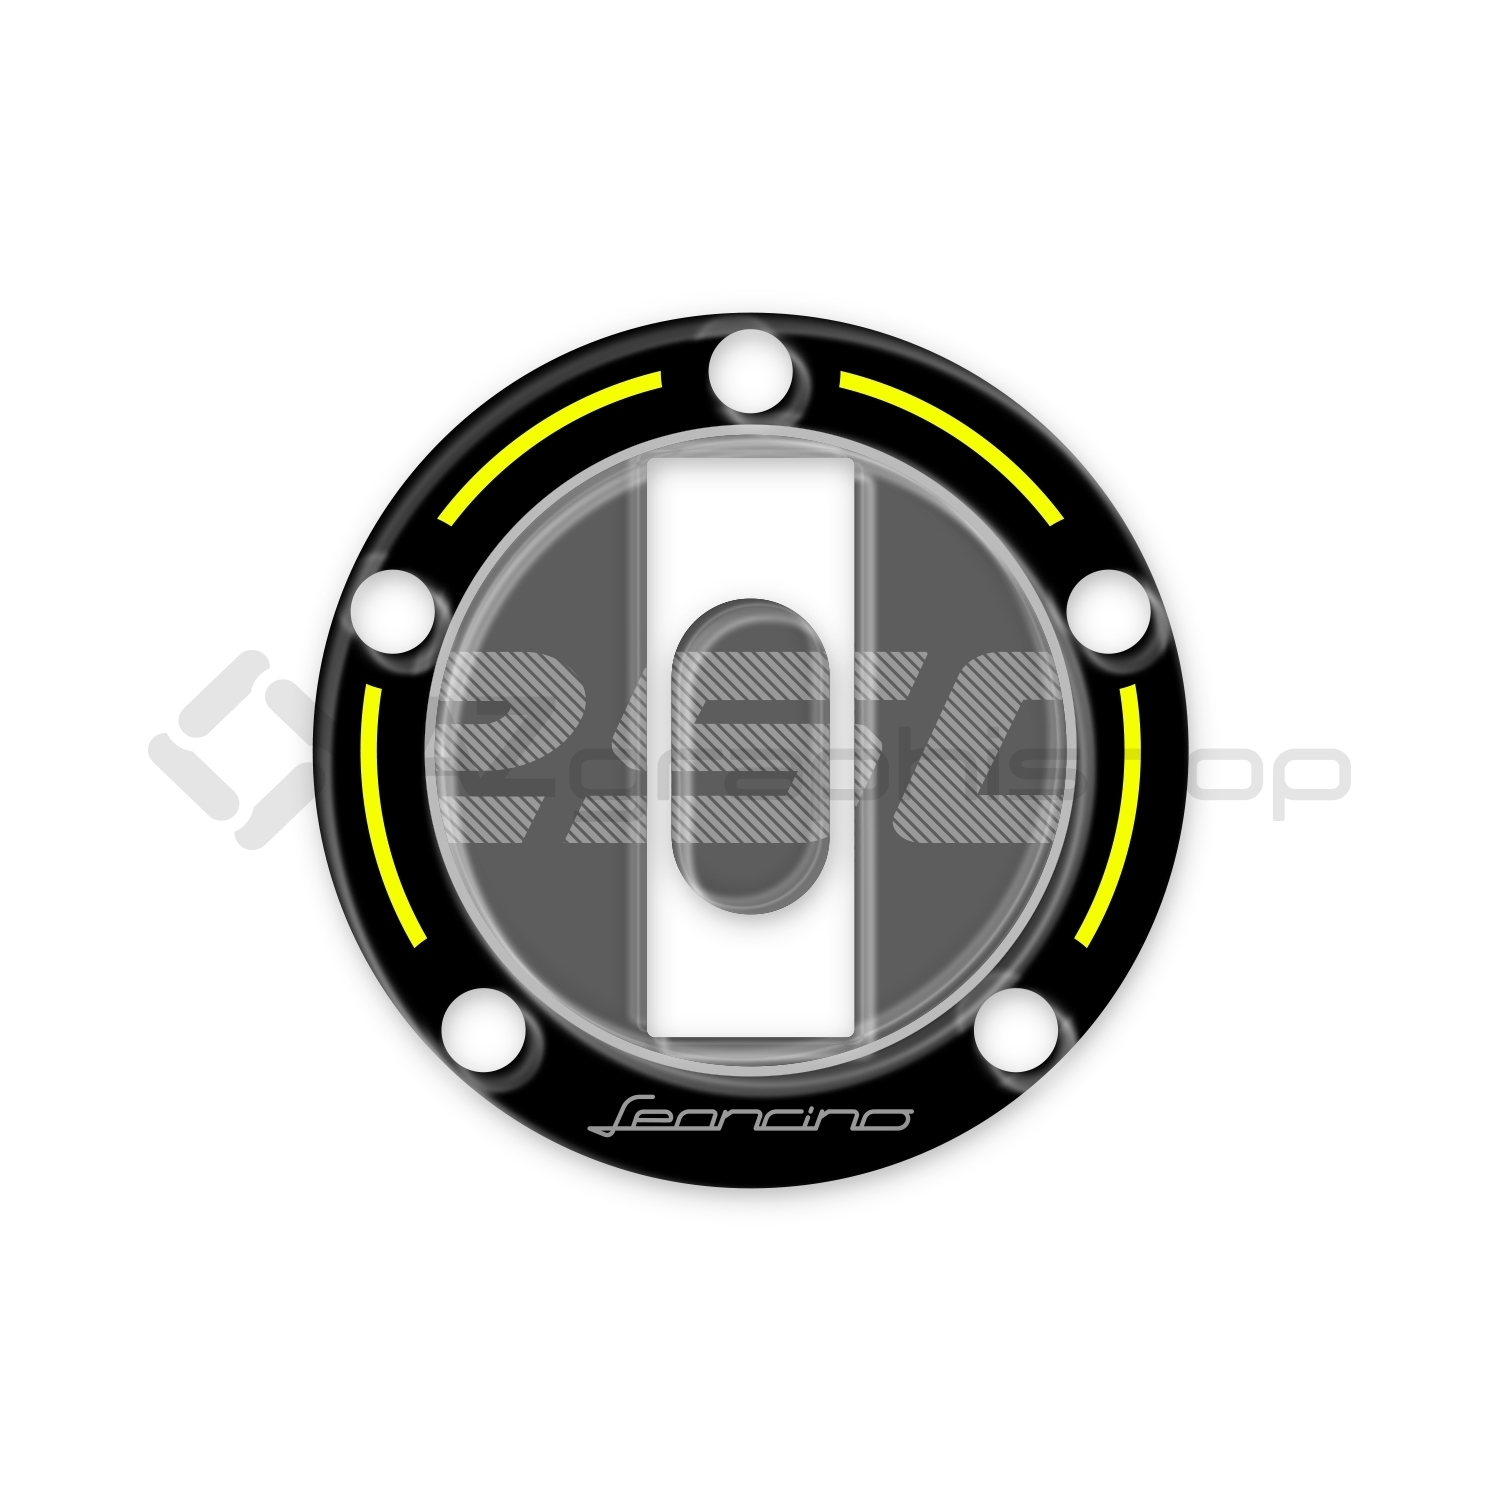 Fuel cap protection for Benelli Leoncino 250 2018 On GP-629